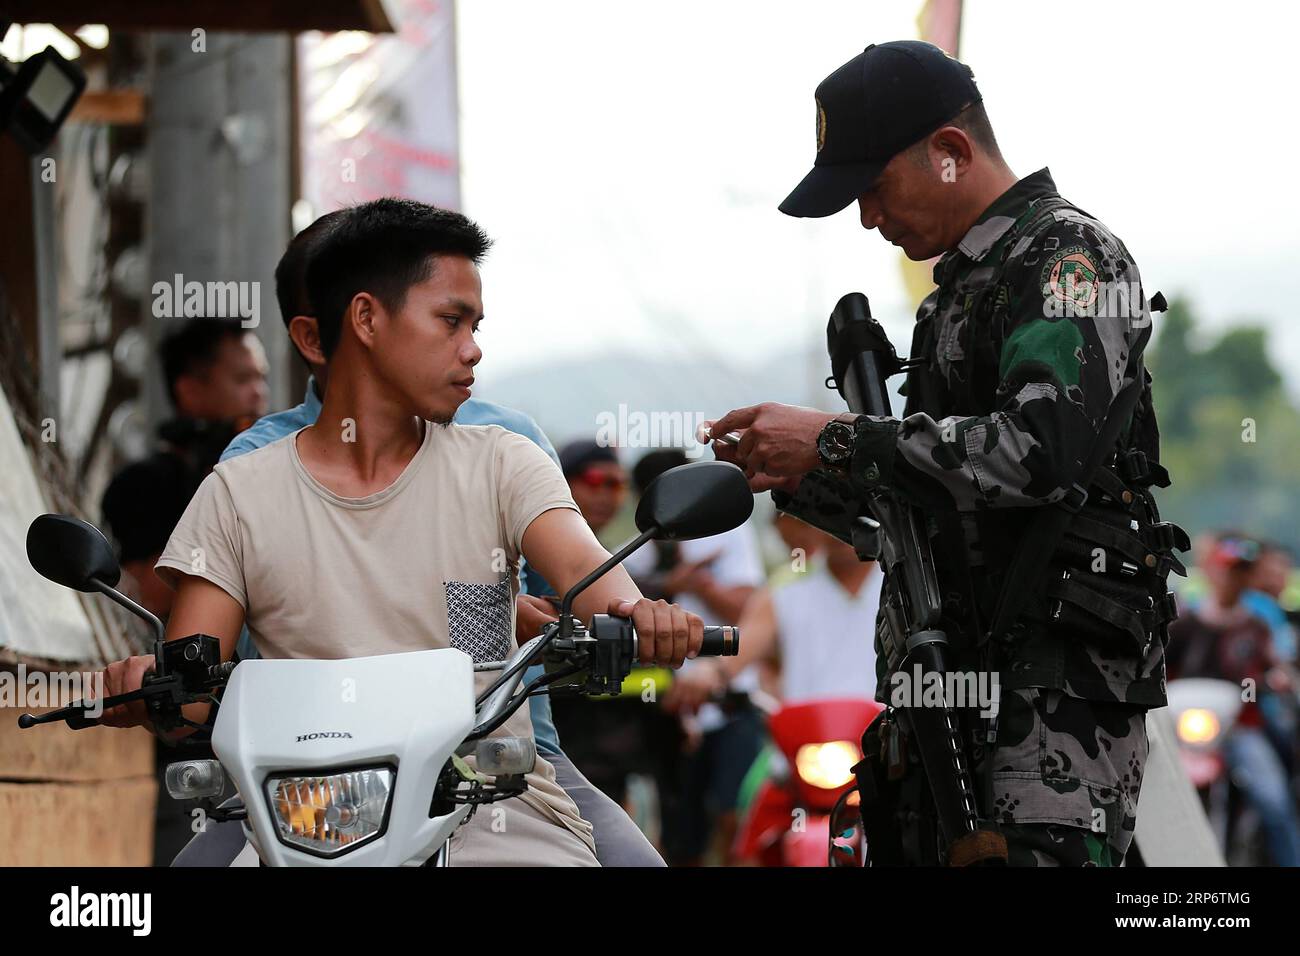 (190120) -- COTABATO CITY, Jan. 20, 2019 -- A policeman from the Philippine National Police inspects the identification cards of motorists during a security check at a road in Cotabato City, the Philippines, Jan. 20, 2019. Muslim Filipinos will cast their vote on Monday to ratify the landmark Bangsamoro Organic Law (BOL), a law that will pave the way for wider self-rule to the Muslim minority in the Philippines and is hoped to end the decades-old conflict in southern Philippines. ) PHILIPPINES-COTABATO CITY-BOL-SECURITY ROUELLExUMALI PUBLICATIONxNOTxINxCHN Stock Photo